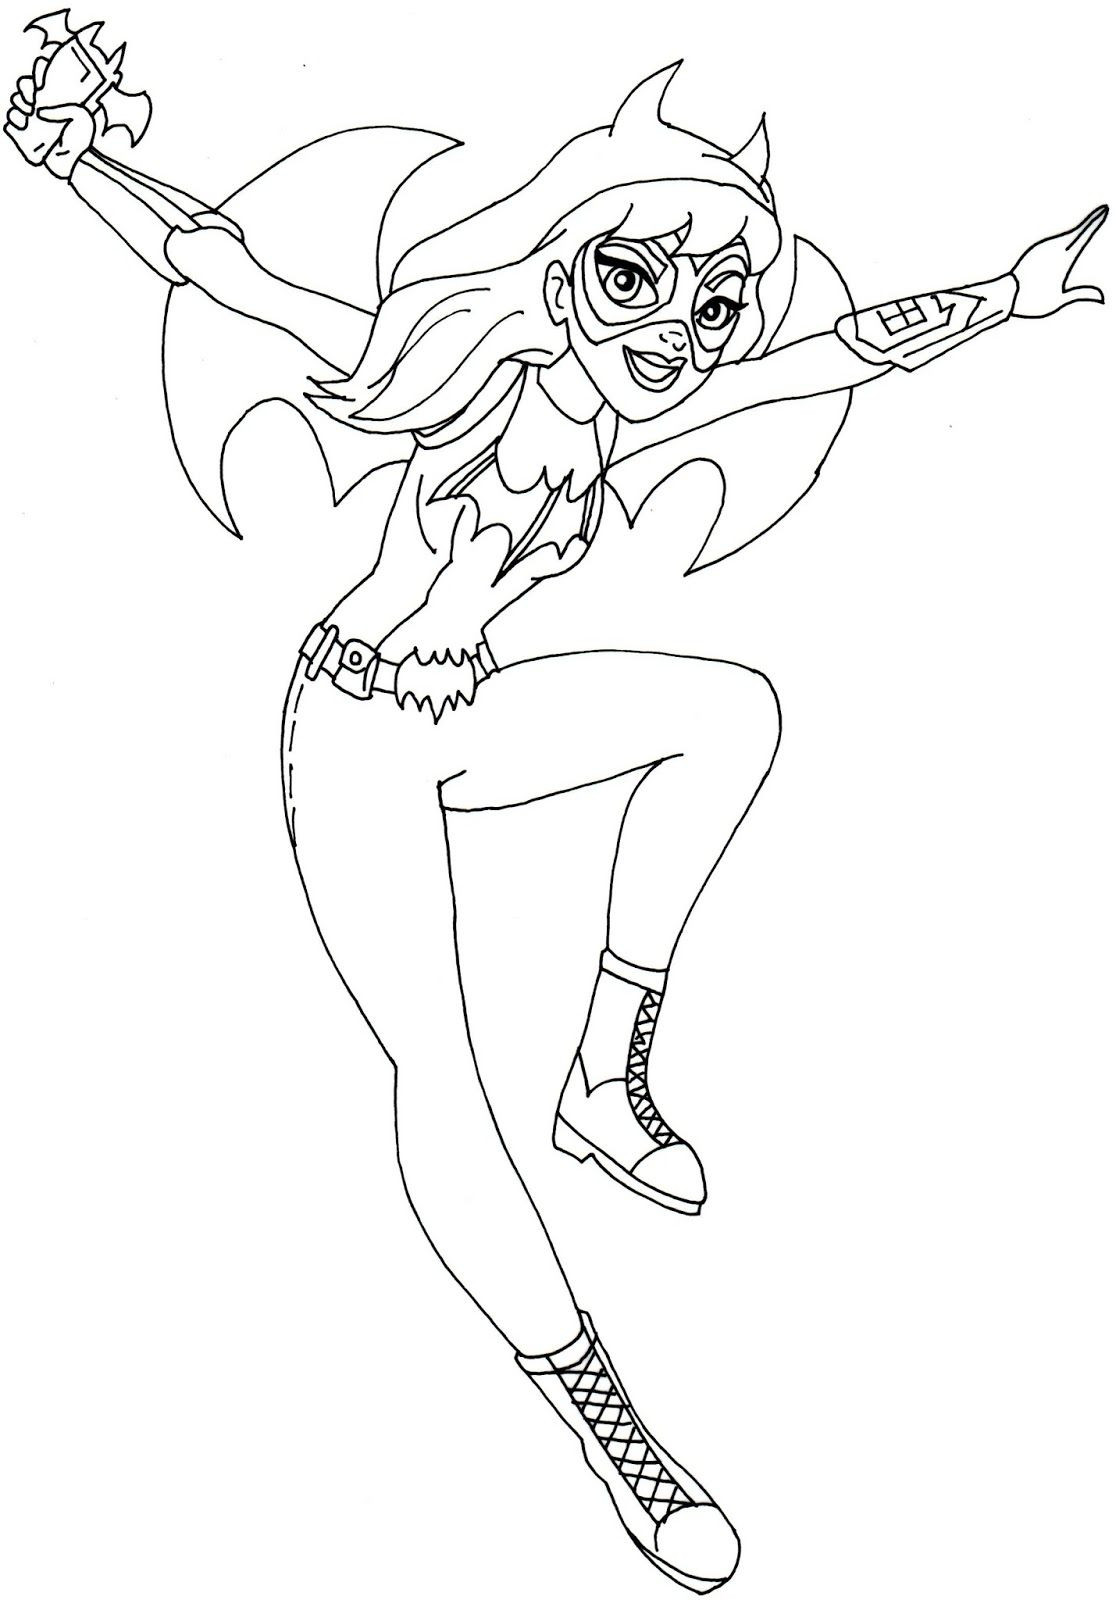 Girl Superhero Coloring Pages Free
 Free printable Super Hero High coloring page for Batgirl